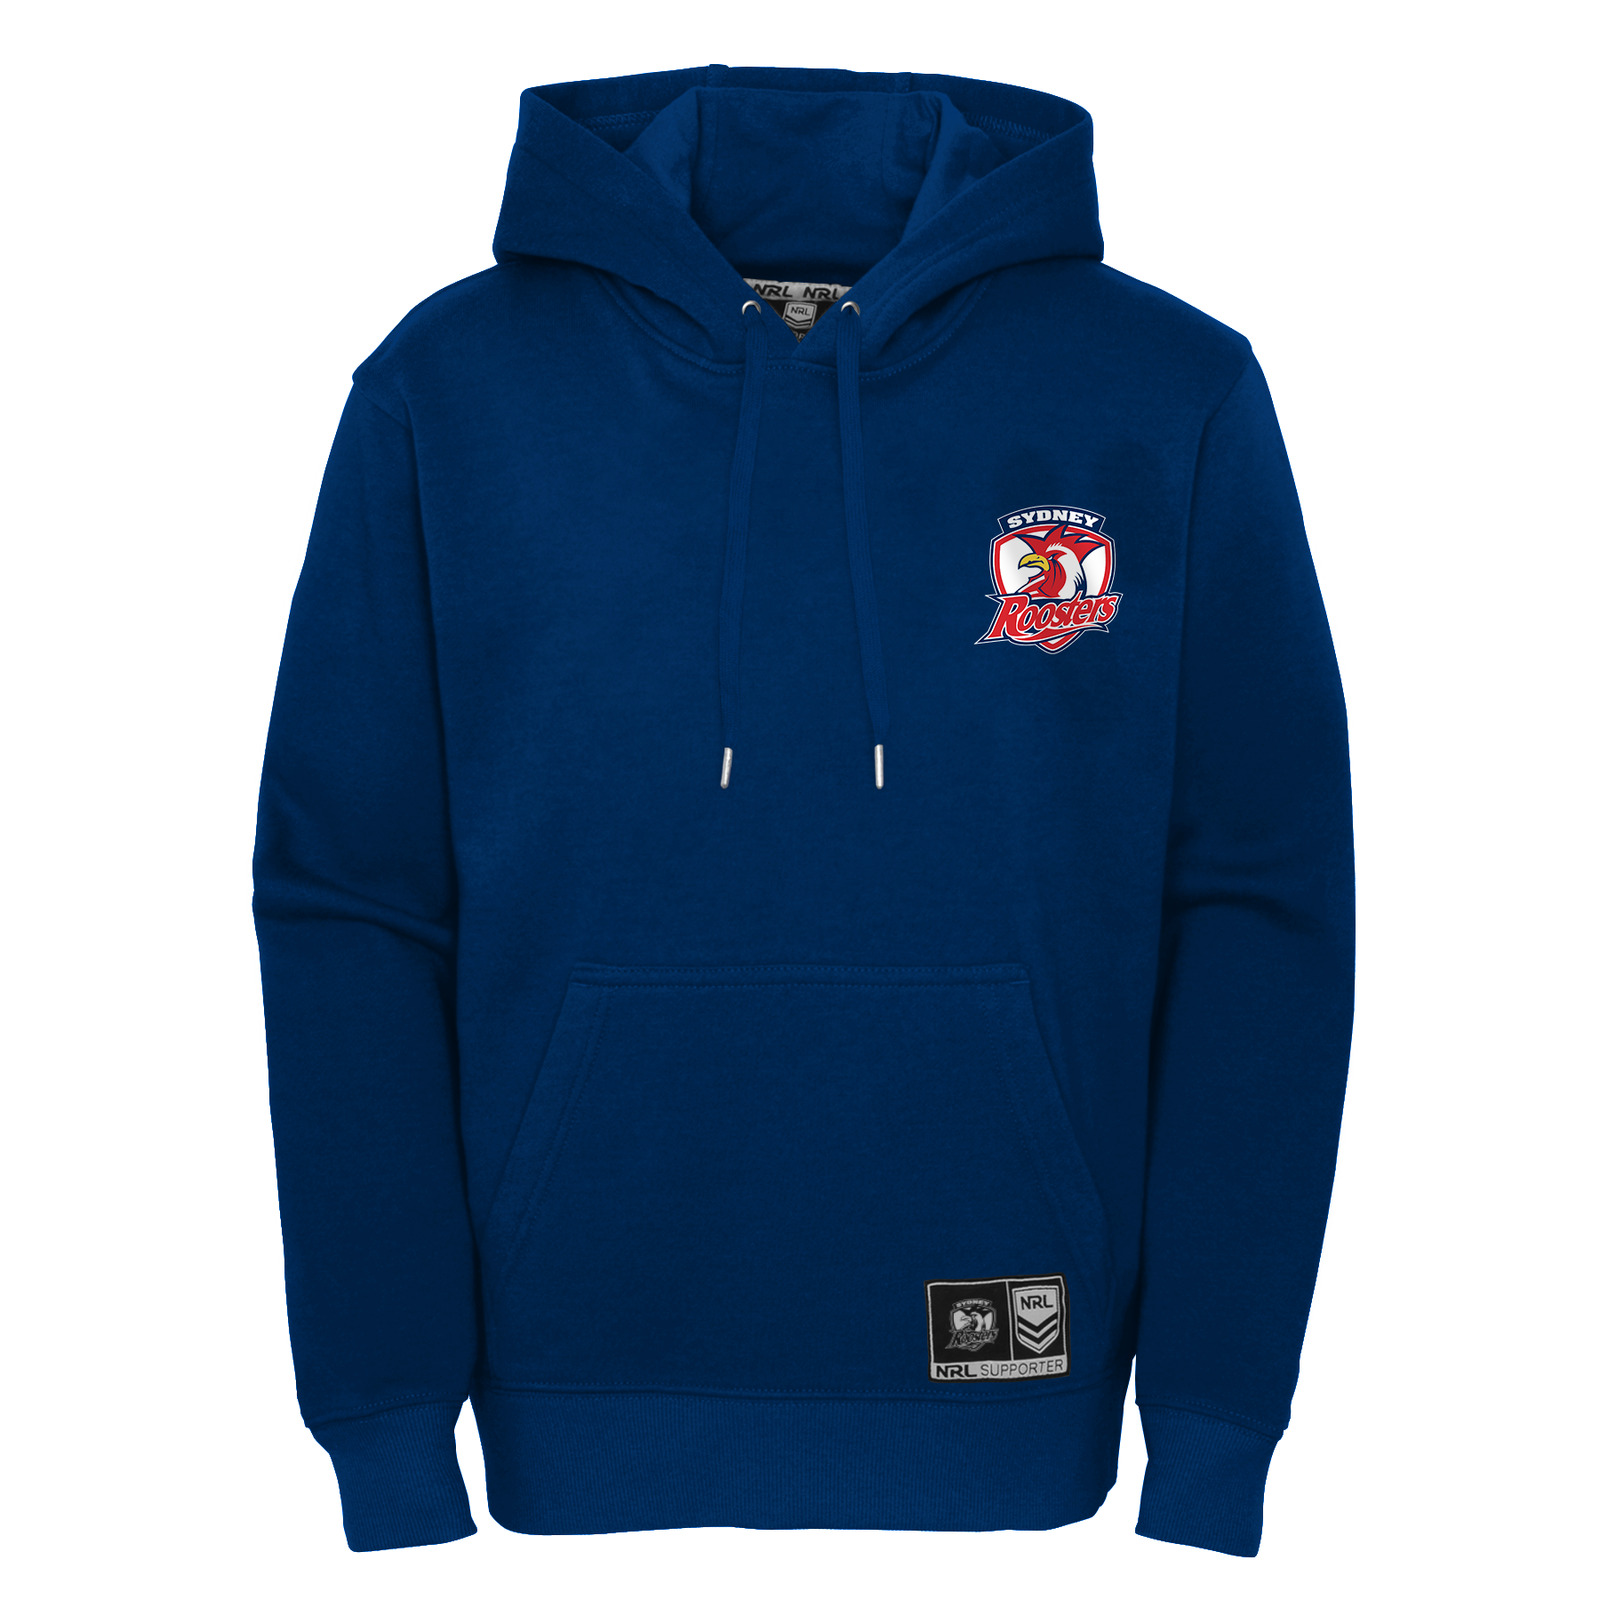 Sydney Roosters NRL Outerstuff Dual Logo Hoody Size S-5XL! S2